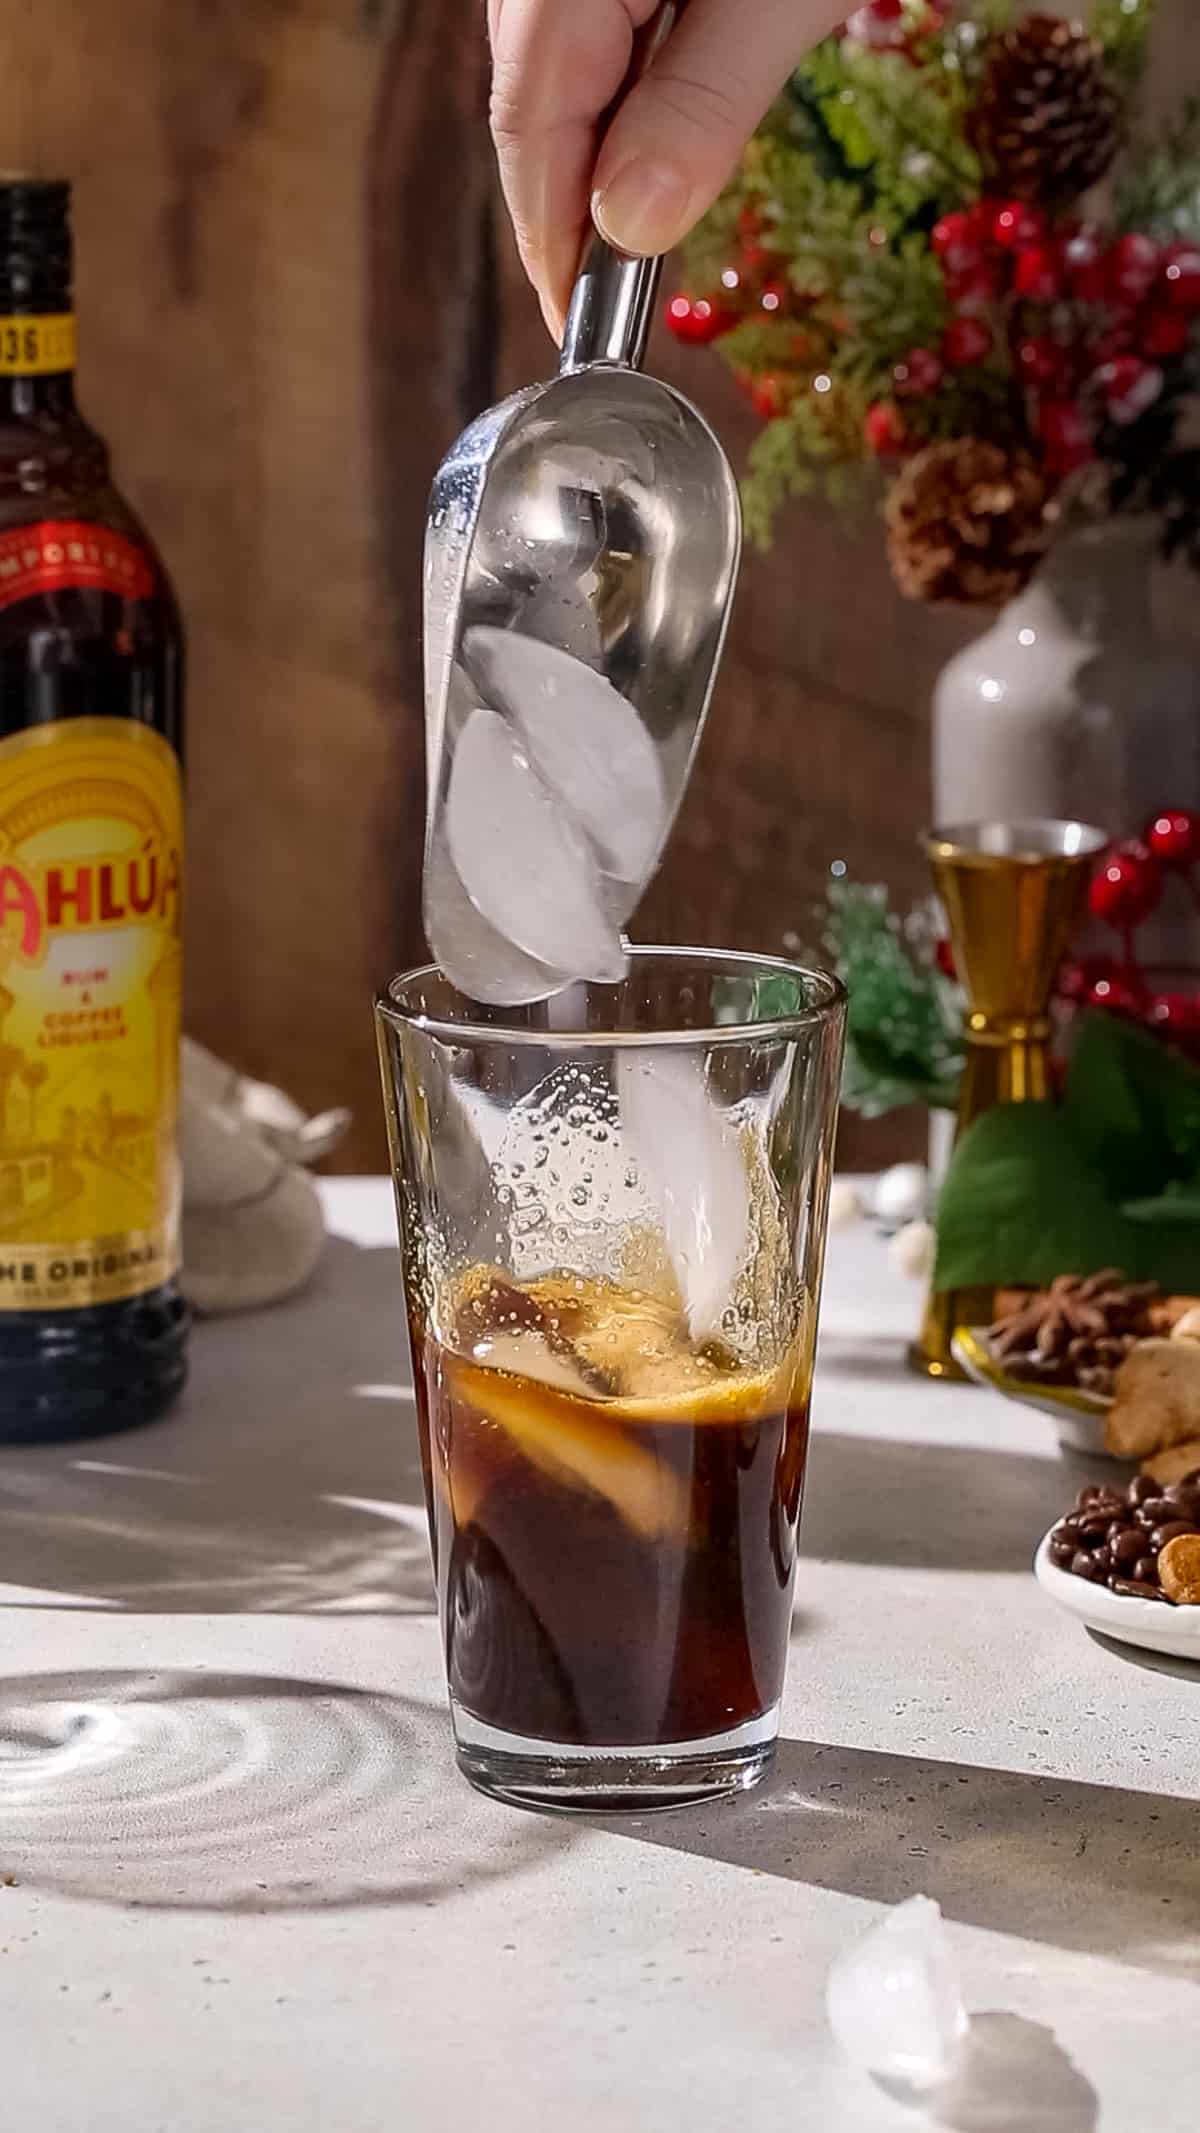 Hand using an ice scoop to add ice to a cocktaiil shaker filled with brown liquid.